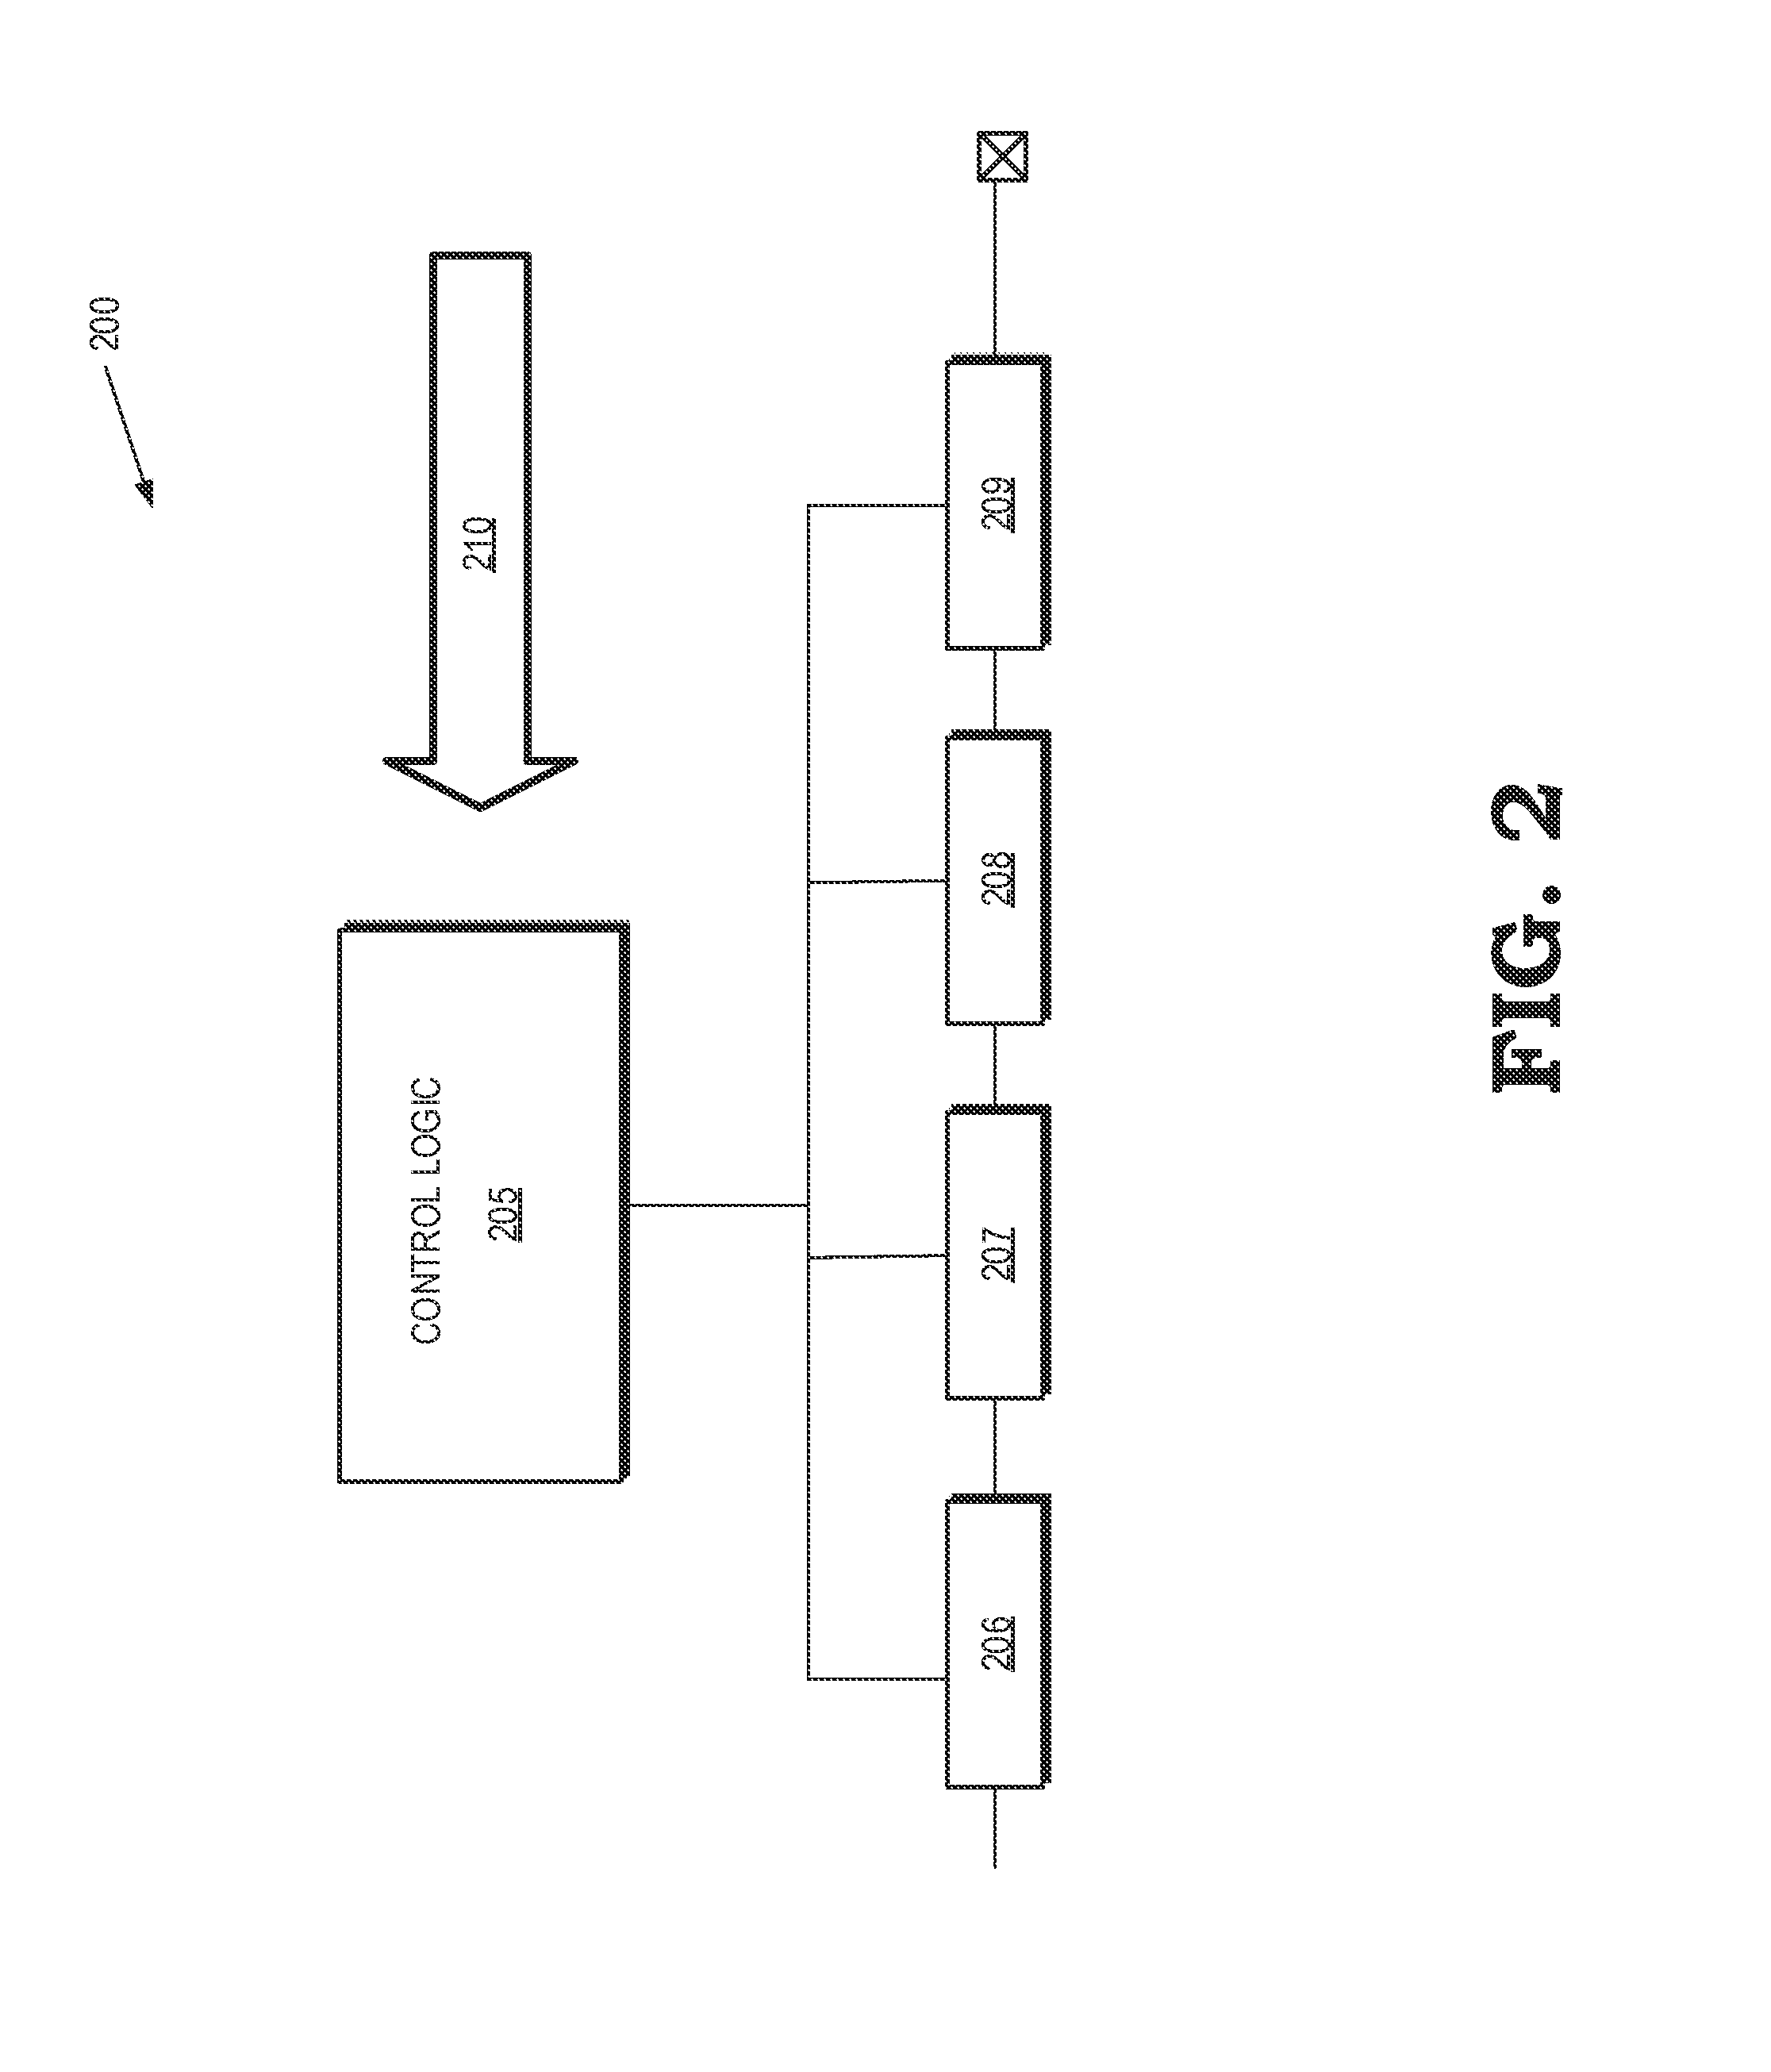 Variable series resistance termination for wireline serial link transistor